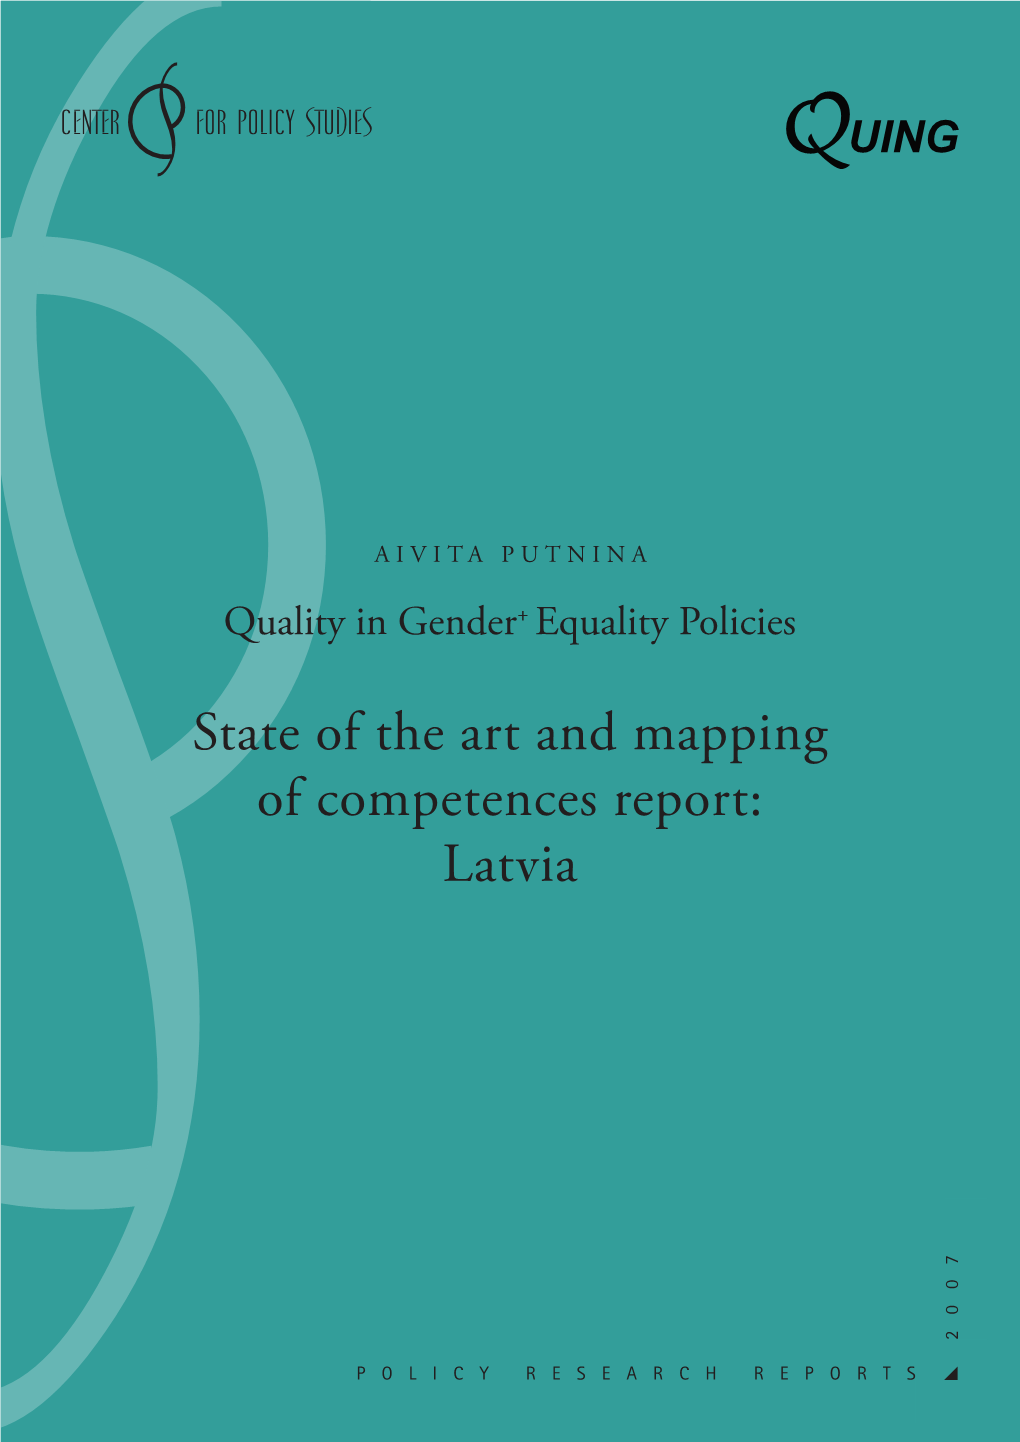 State of the Art and Mapping of Competences Report: Latvia 2007